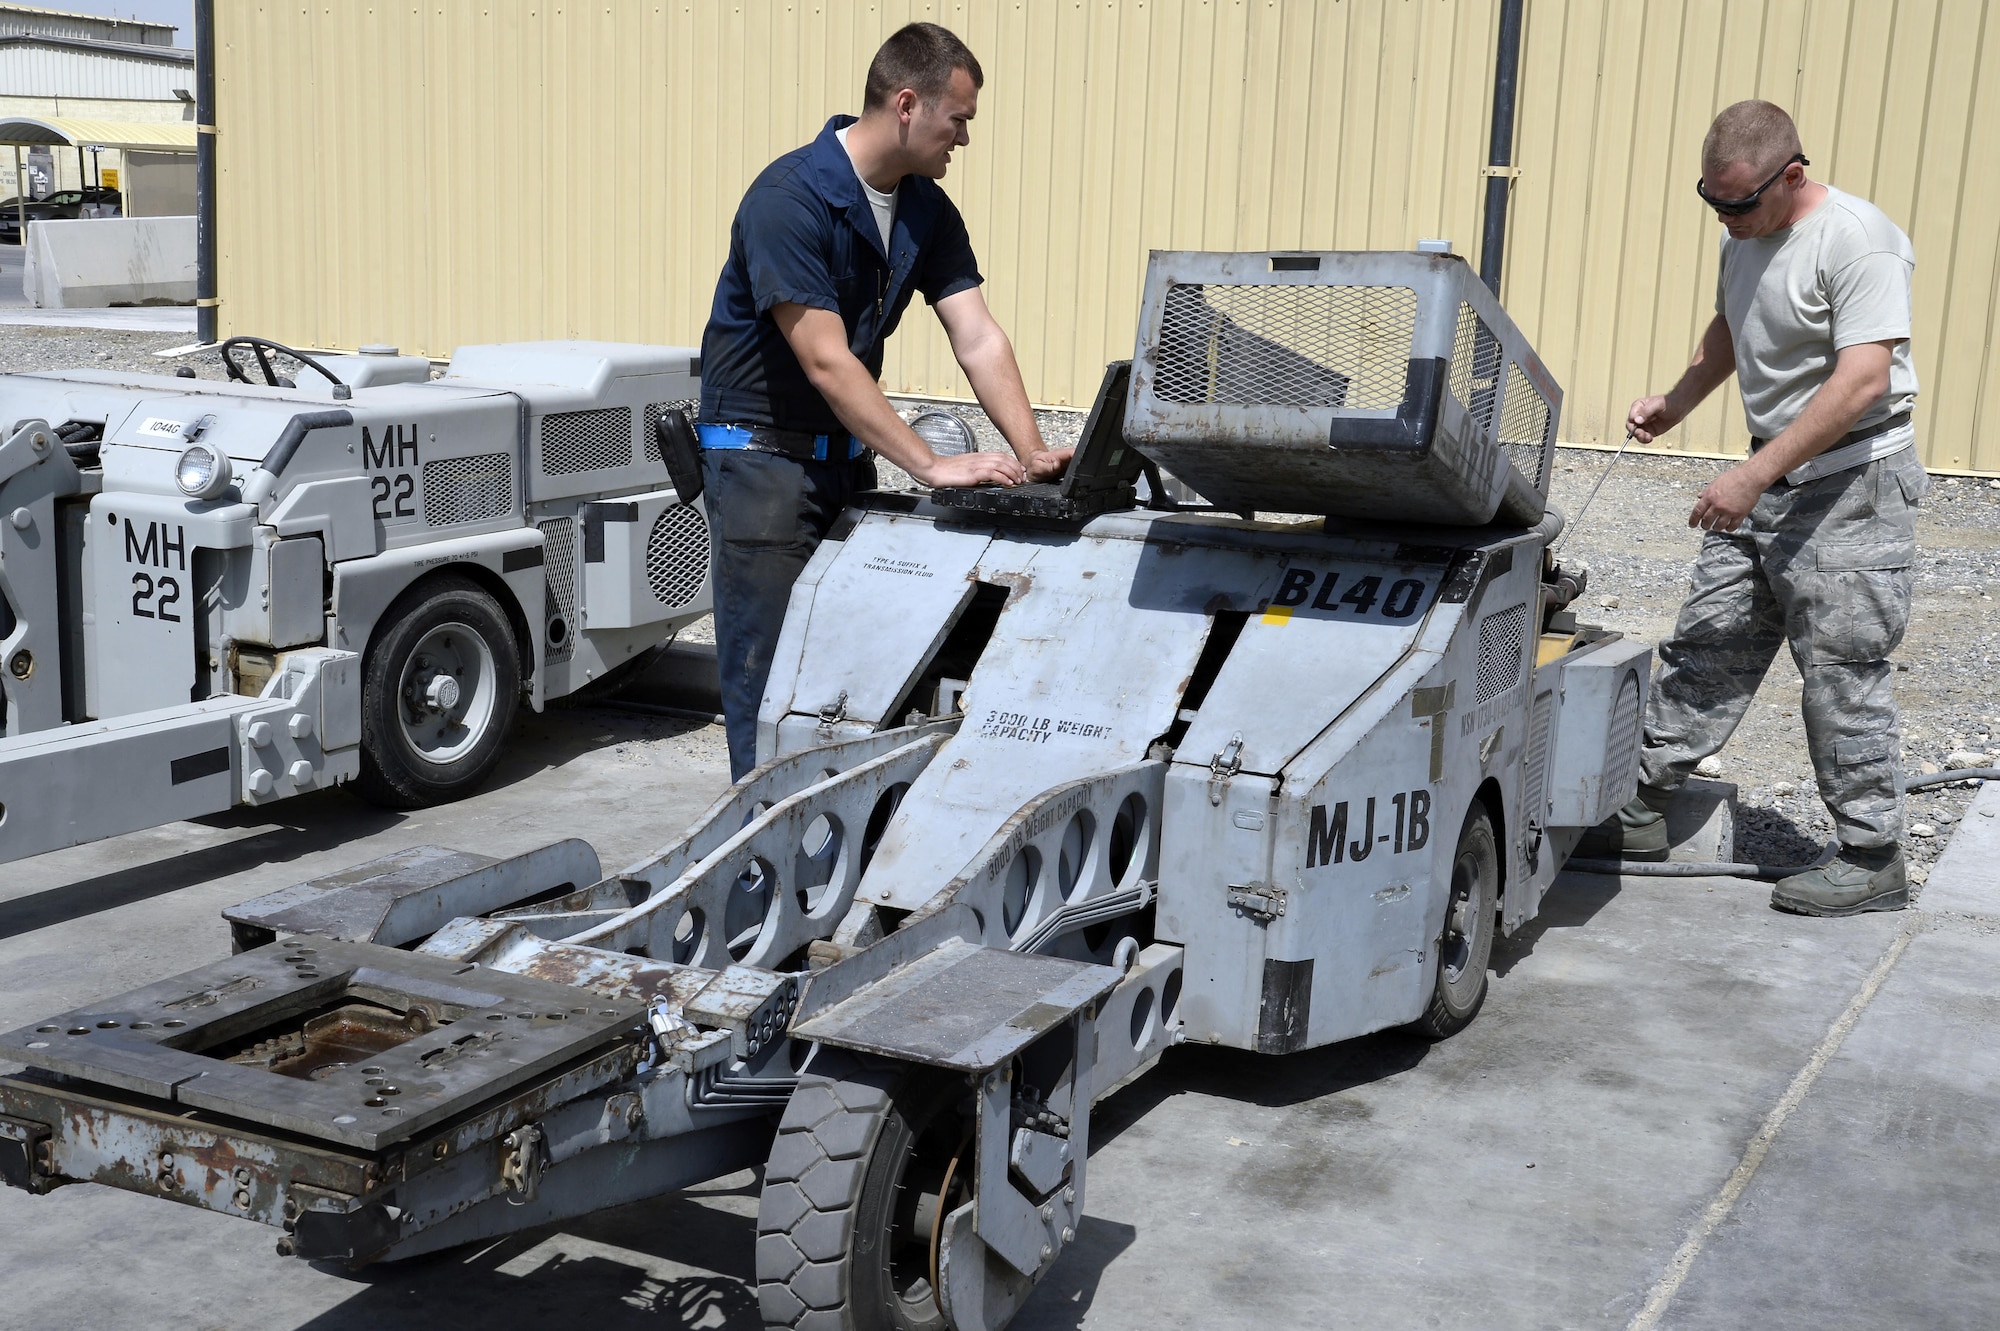 Staff Sgt. Nicholas, right, Aerospace Ground Equipment assistant floor lead, and Senior Airman Michael, AGE journeyman, performs general maintenance on a MJ-1B Jammer at an undisclosed location in Southwest Asia Mar. 3, 2015. The AGE flight provides equipment such as hydraulic test stands, diesel generators, gas turbine generators, air conditioning units, heaters, jacks, maintenance stands, nitrogen carts, lights and more to support six different airframes. Nicholas is currently deployed from Seymour Johnson Air Force Base, N.C., and is a native of Geraldine, Ala. Michael is currently deployed from Hill Air Force Base, Utah and is a native of Burleson, Texas. (U.S. Air Force photo/Tech. Sgt. Marie Brown) (RELEASED)